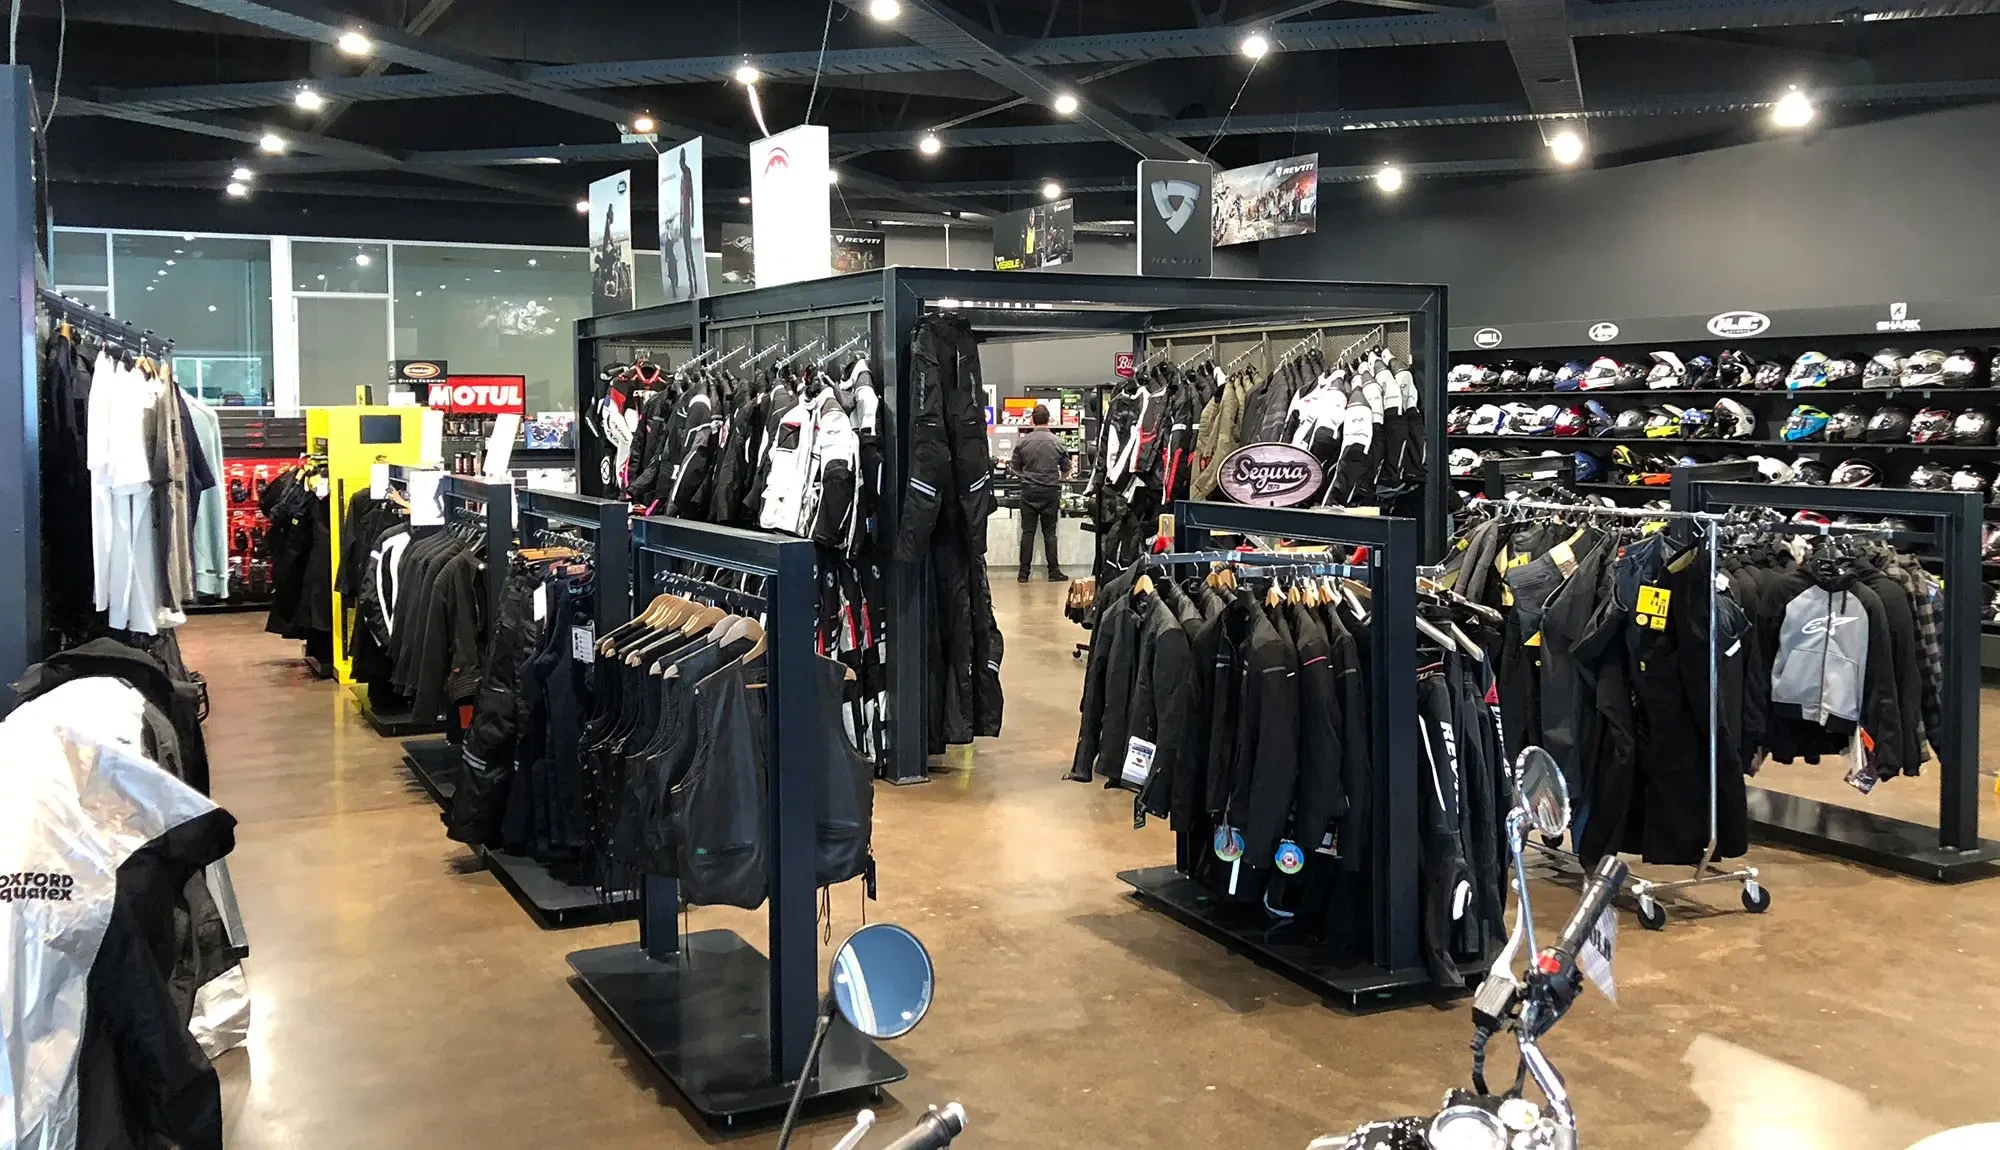 Motorcycle Parts, Accessories, and Clothing